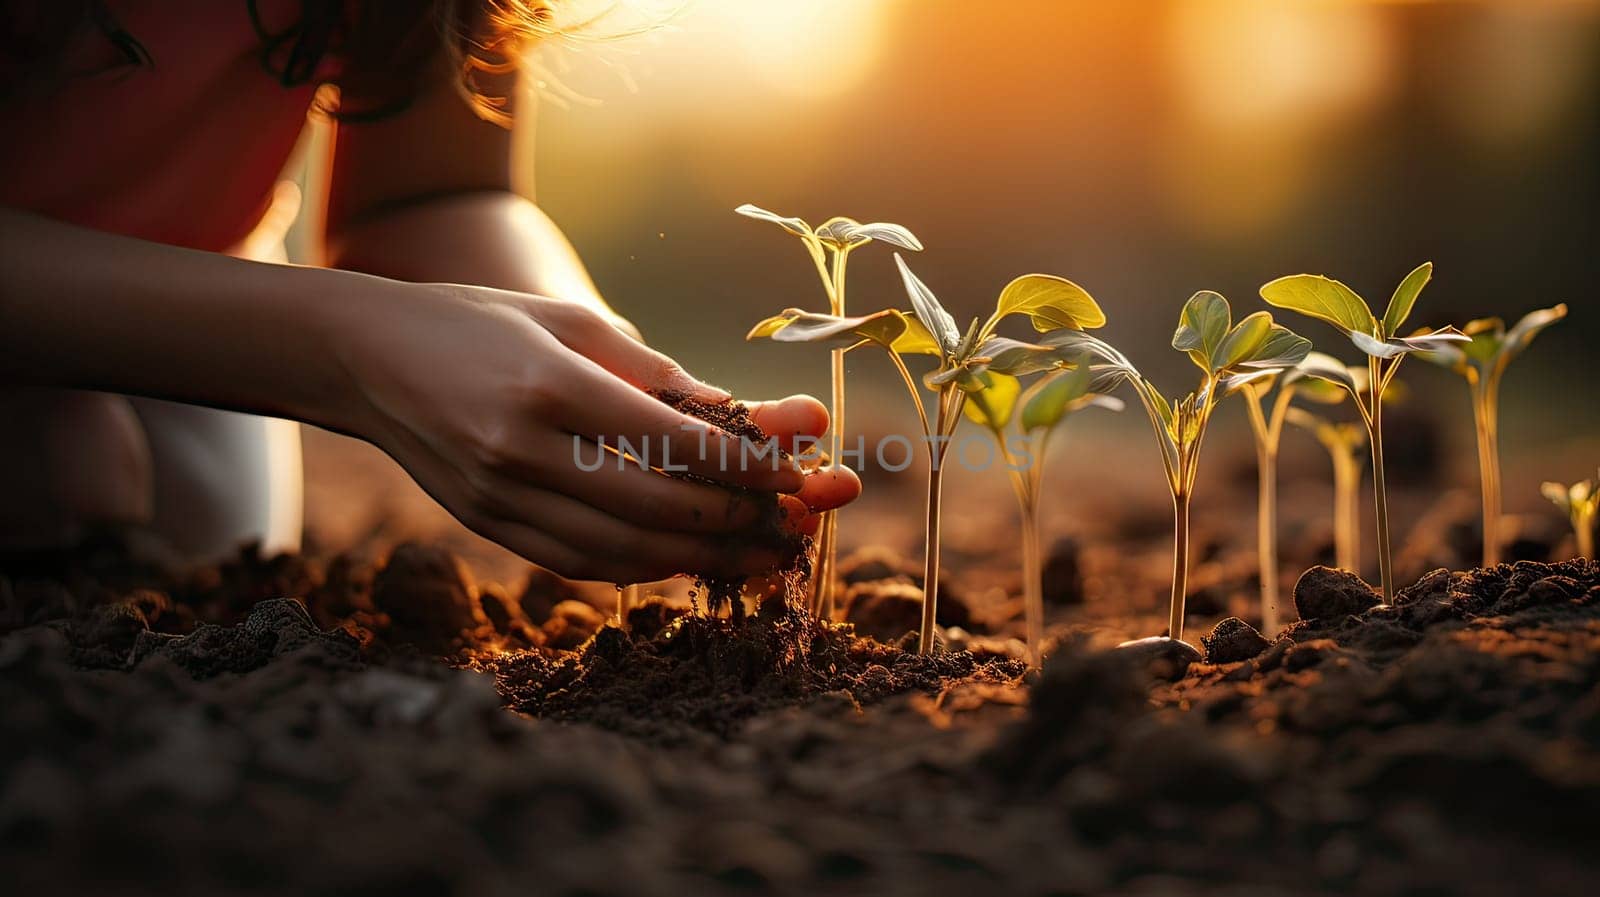 Female hands nurturing soil for plant growth. Agriculture, gardening, and ecology concept. Touching the earth with care and preparing for the growth of vegetable or plant seedlings